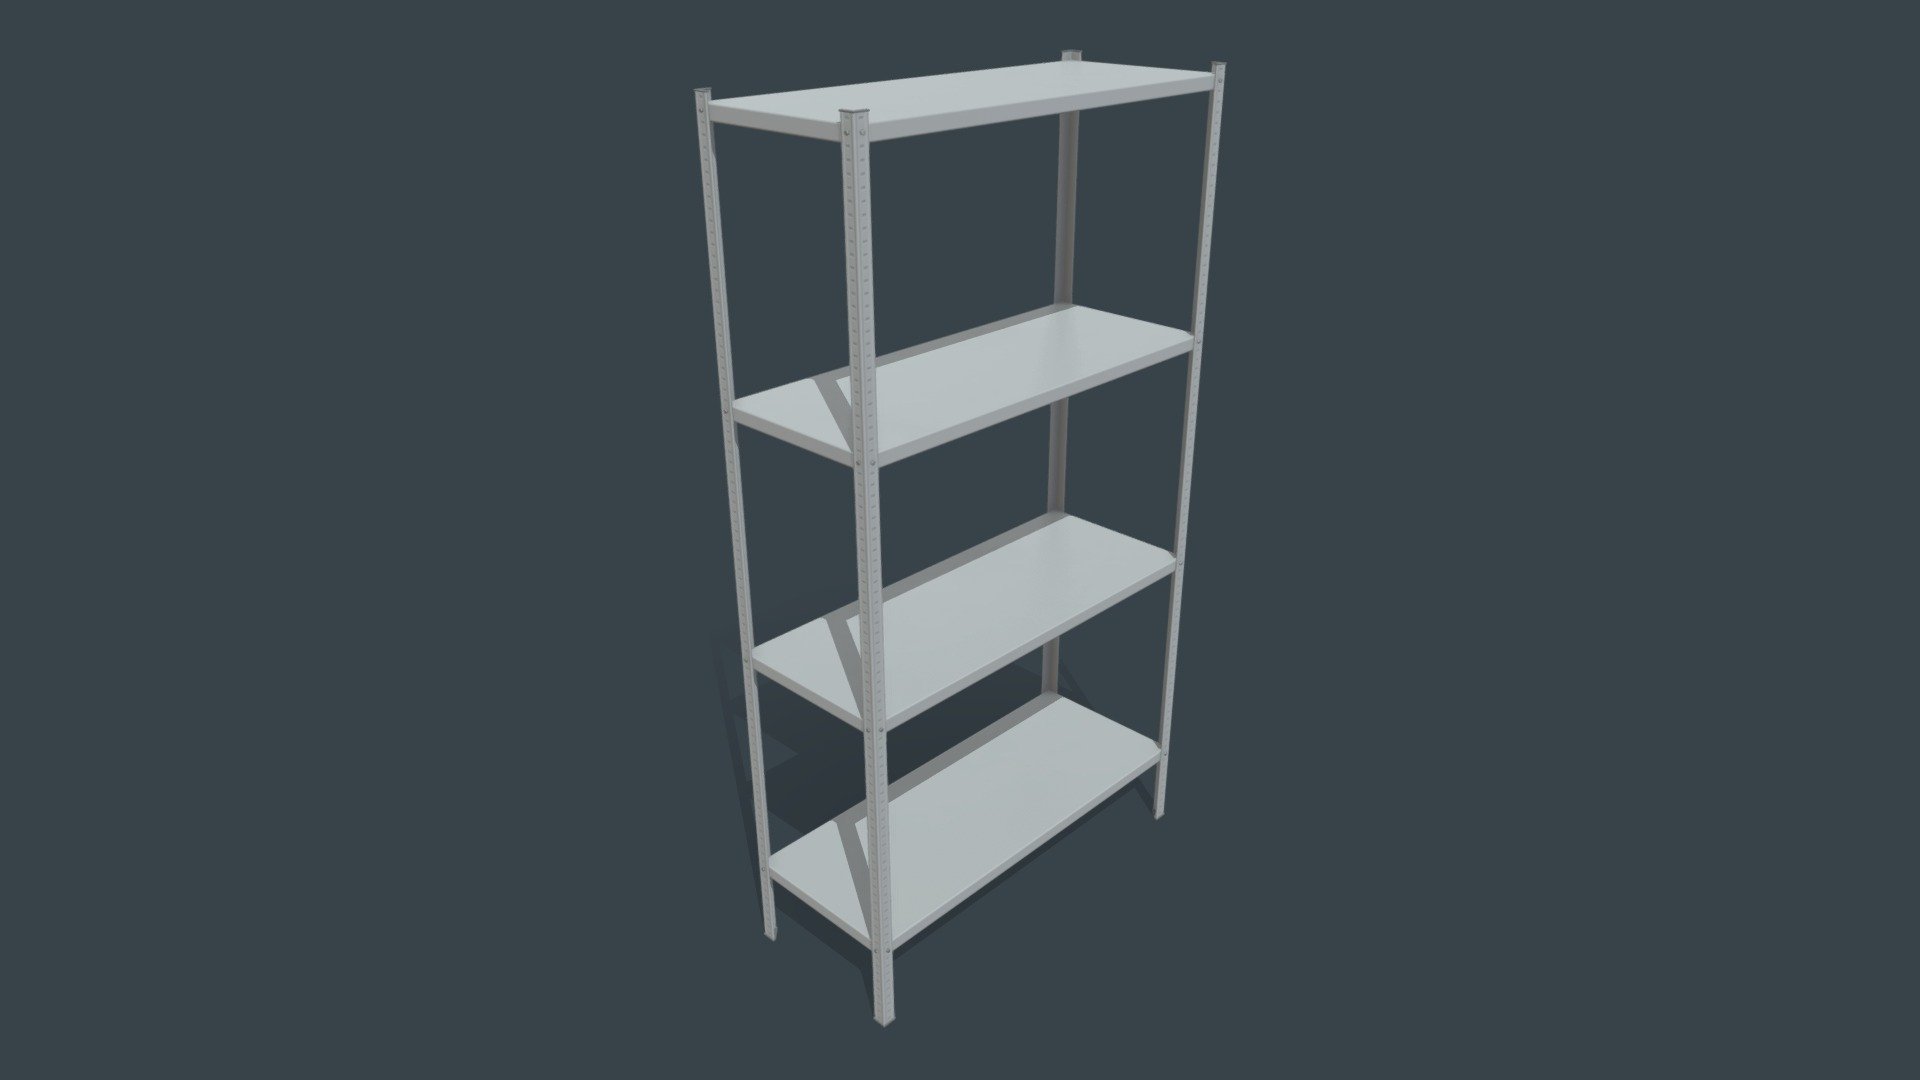 Game ready low-poly Metal Rack model with PBR textures for game engines/renderers. 4096x4096 PBR Metallic/Roughness textures.

This product is intended for game/real time/background use. This model is not intended for subdivision. Geometry is triangulated. Model unwrapped manually. All materials and objects named appropriately. Scaled to approximate real world size(Height: 1853mm/72.9inches, Width: 1006mm/39.6inches, Depth: 406mm/16inches). Tested in Marmoset Toolbag 3. Tested in Unreal Engine 4. Tested in Unity. No special plugins needed. .obj and .fbx versions exported from Blender 2.83.

4096x4096 textures in png format:
- General PBR Metallic/Roughness  textures: BaseColor, Metallic, Roughness, Normal, AO;
- Unity Textures: Albedo, MetallicSmoothness, Normal, AO;
- Unreal Engine 4 textures: BaseColor, OcclusionRoughnessMetallic, Normal;
- PBR Specular/Glossiness textures: Diffuse, Specular, Glossiness, Normal, AO 3d model